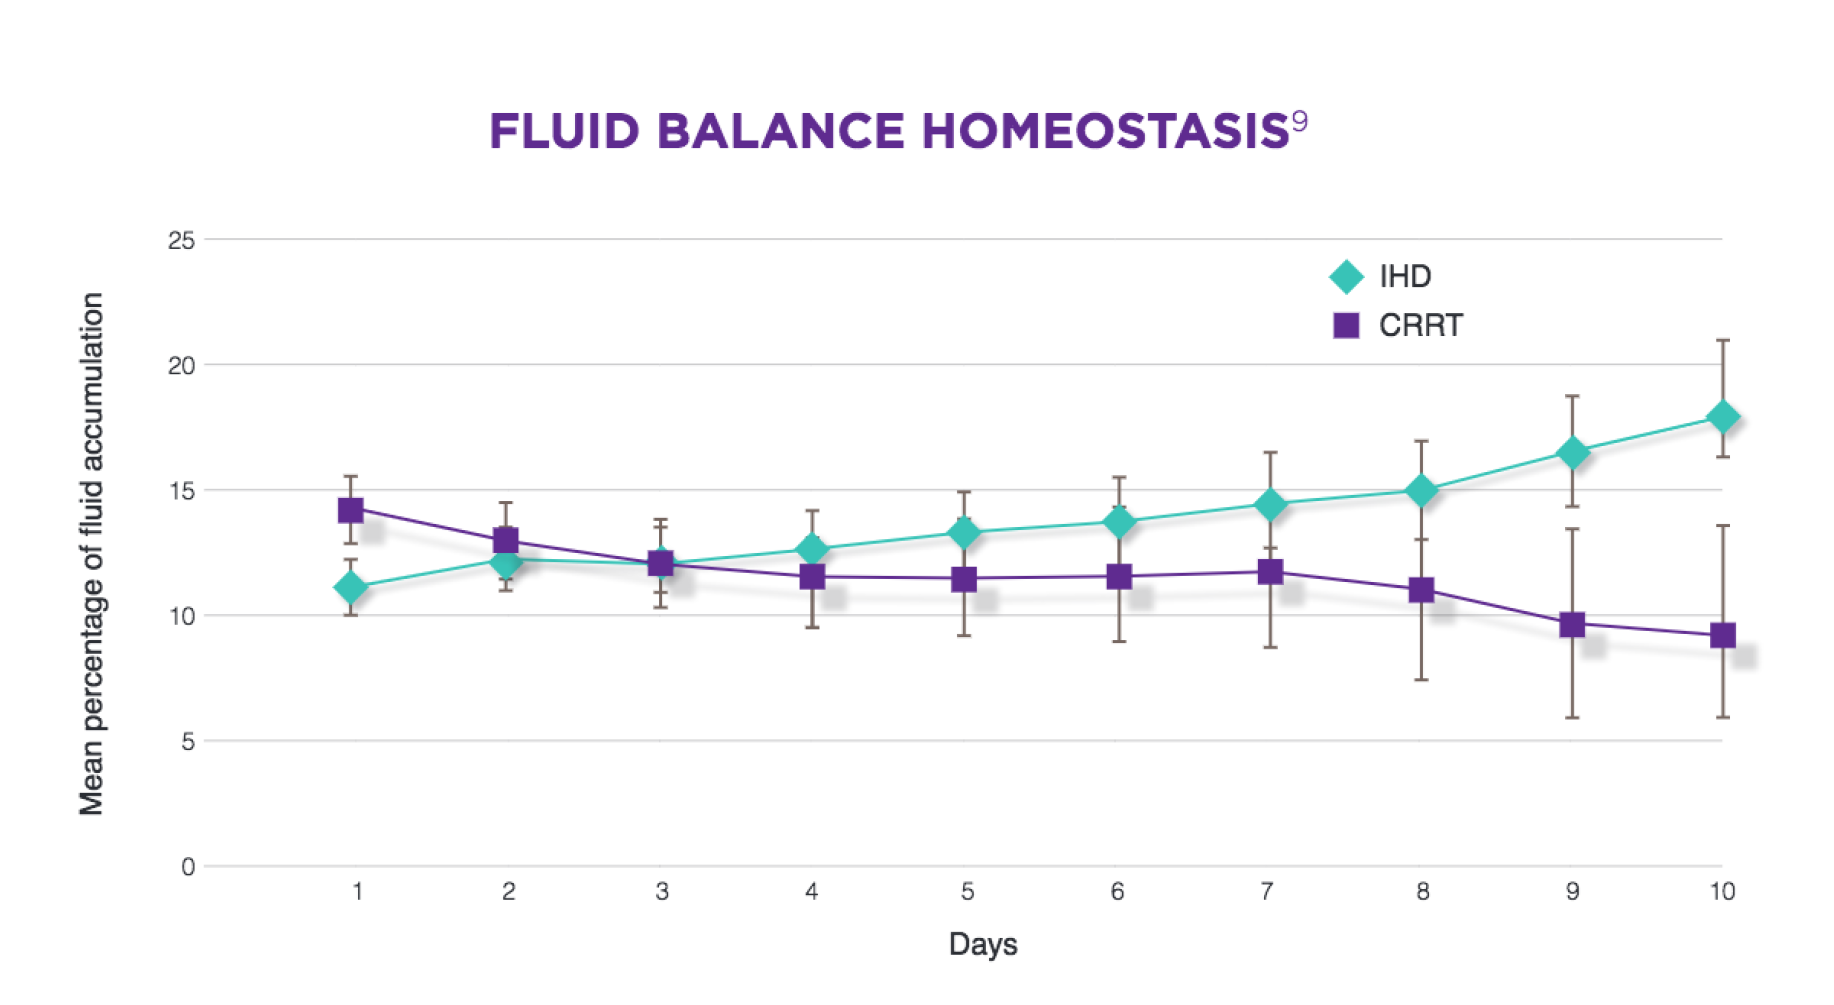 Line graph to show Fluid Balance Homeostasis of IHD vs. CRRT. At 10 days, mean percentage of Fluid Accumulation was less than 10% with CRRT and almost 20% with IRT.